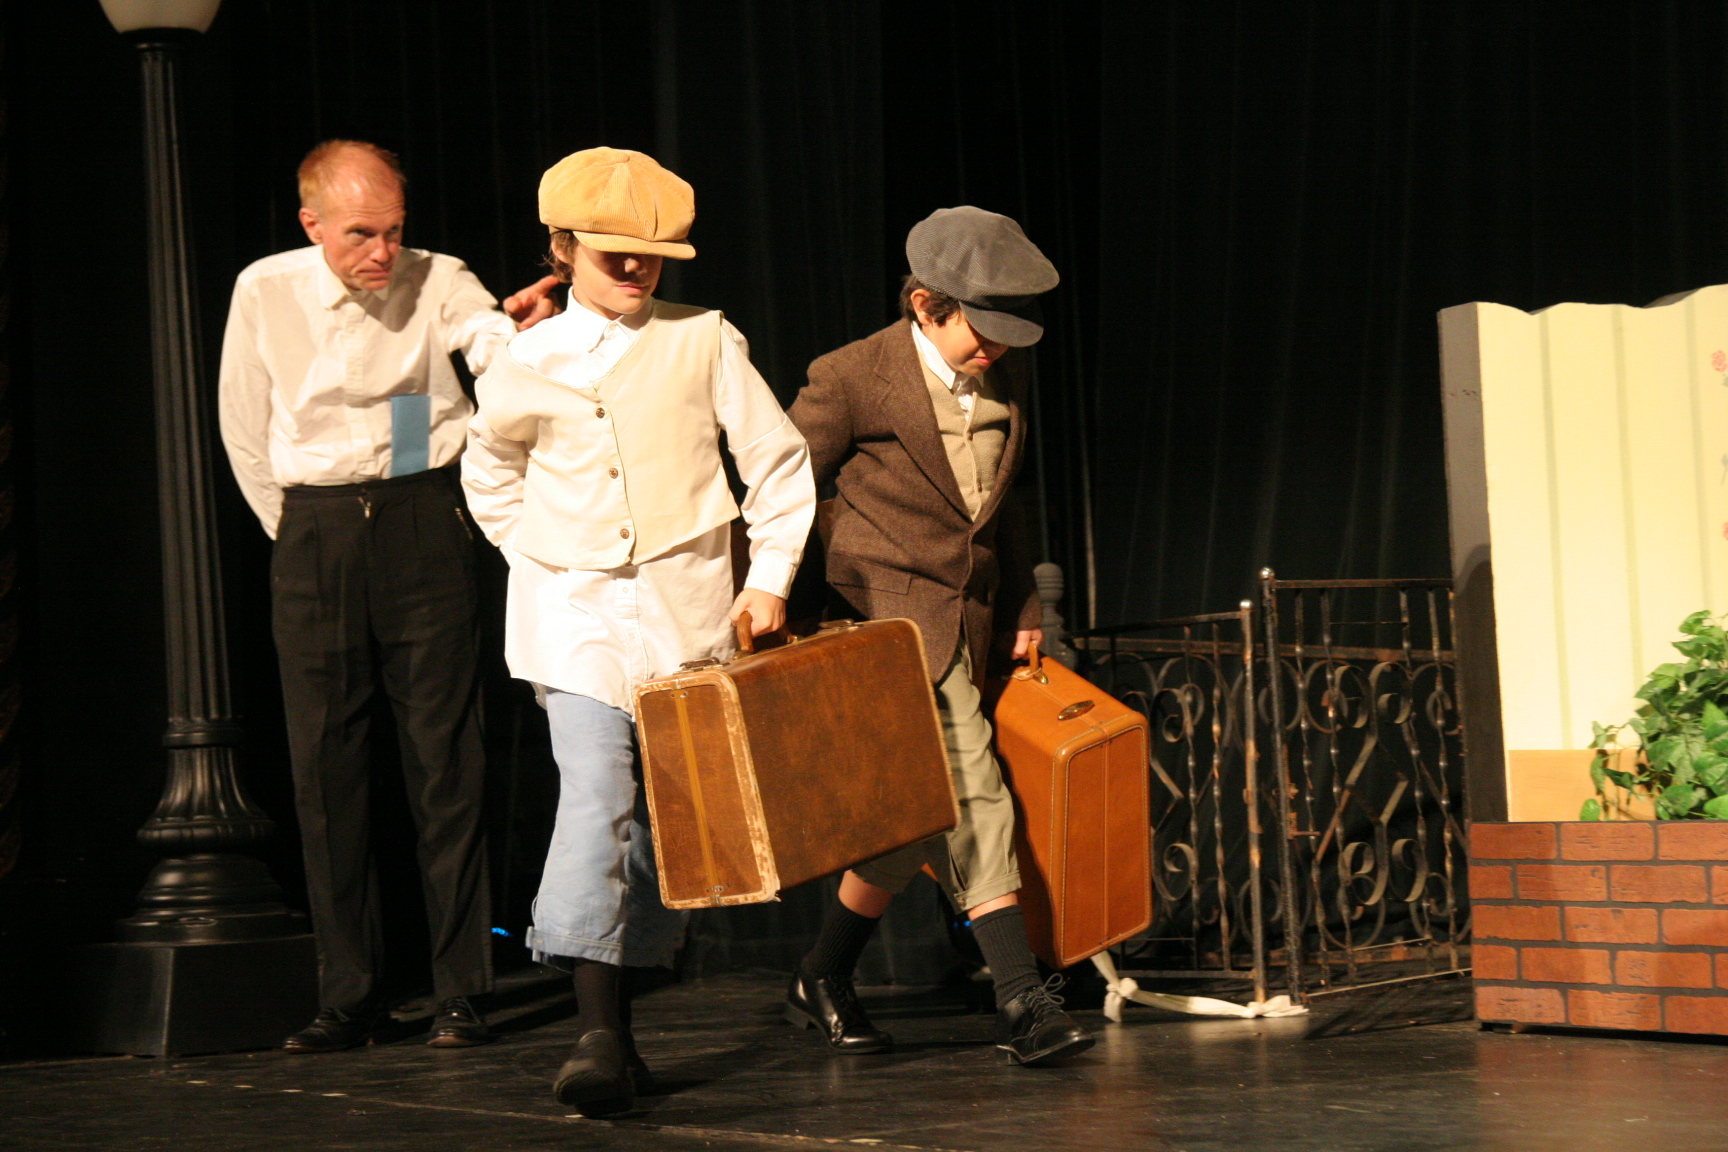 Tryston Skye in The Remarkable Mr. Pennypacker on stage with Don Jorgensen and Isaac Cervantes